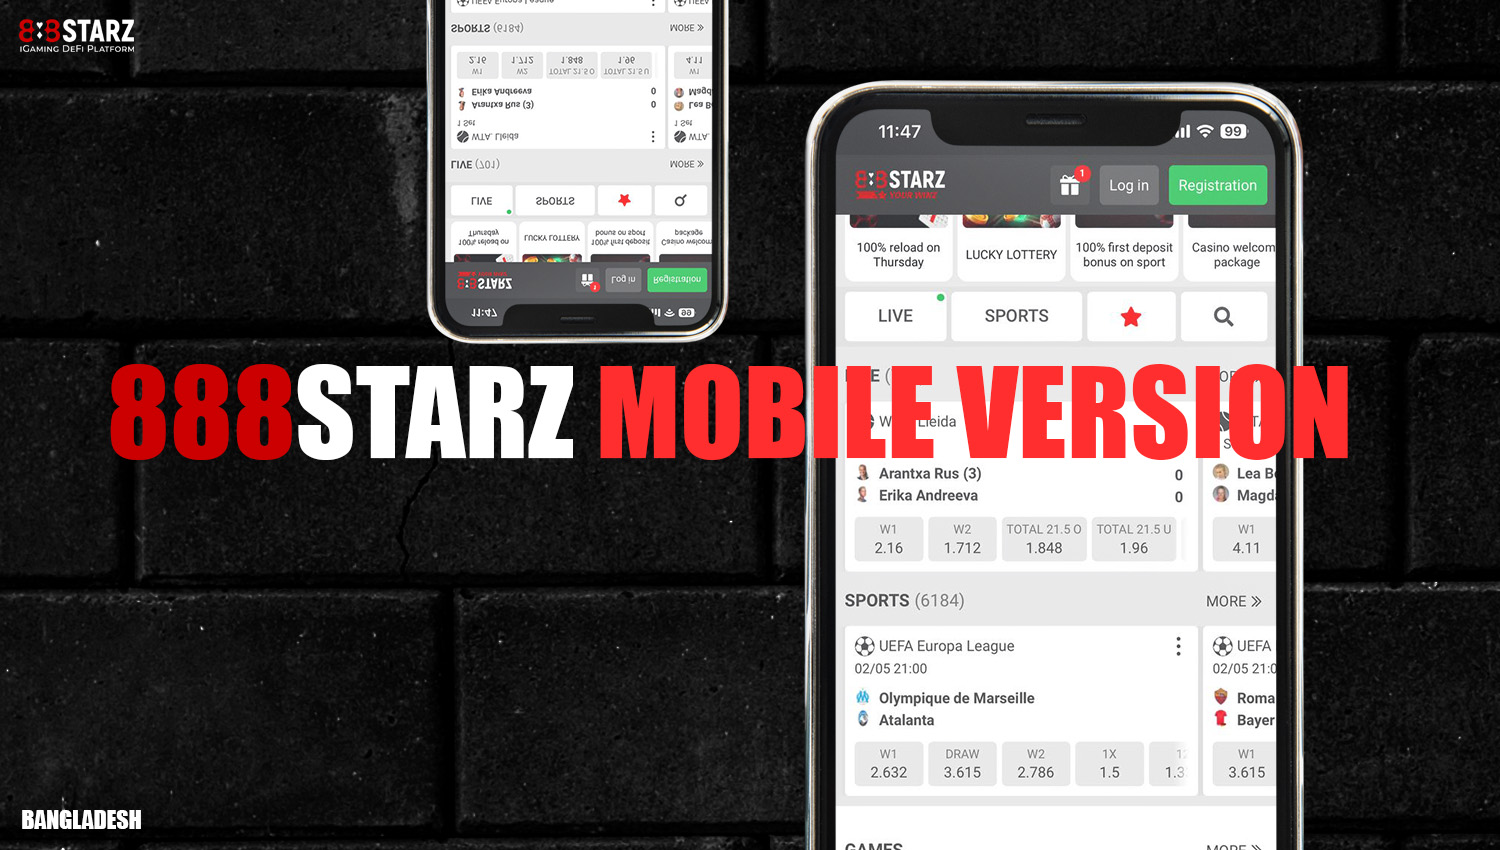 888starz has a mobile-friendly version of the site